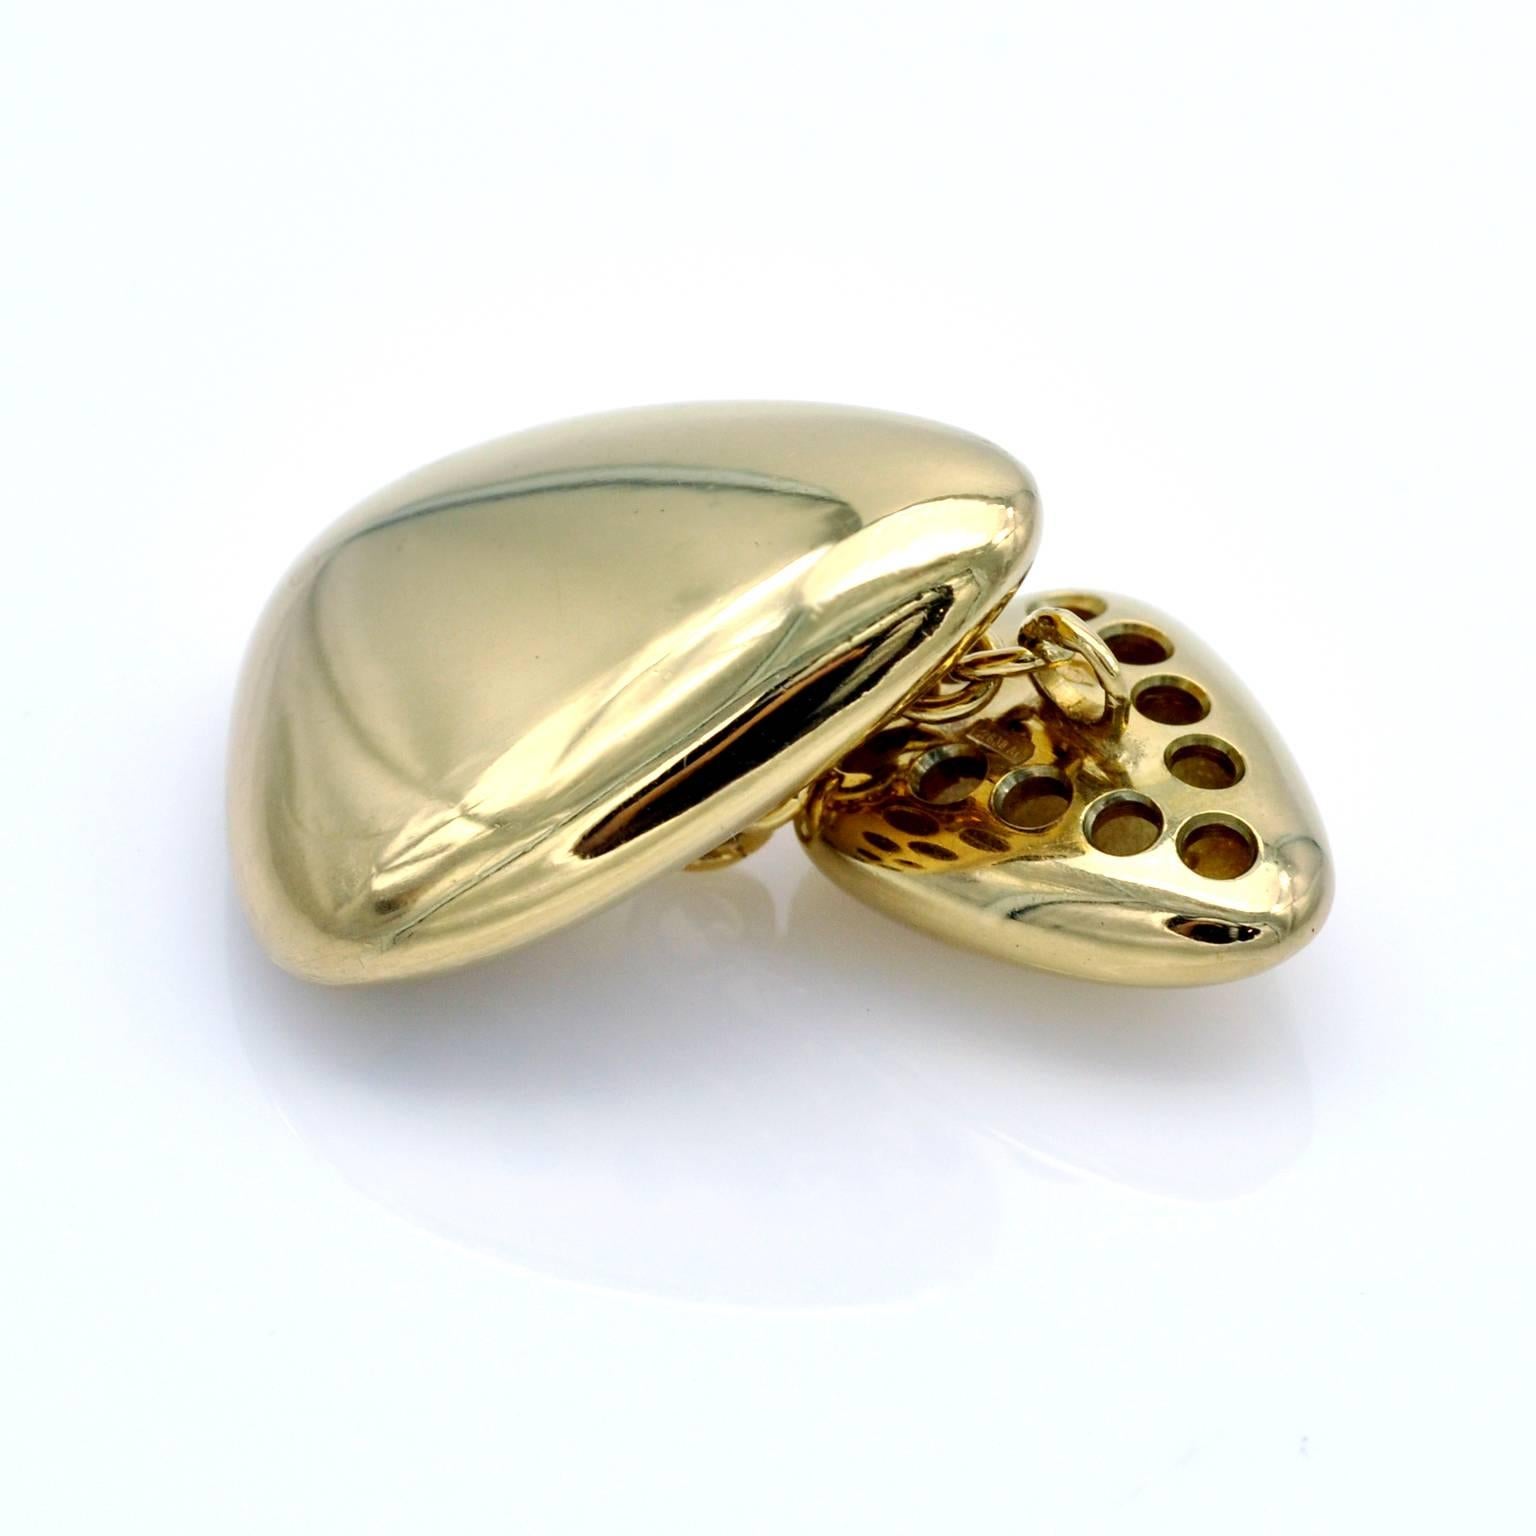 Modernist triangular rounded cufflinks in 18kt gold. they have a pleasant heft as well as eye catching look.